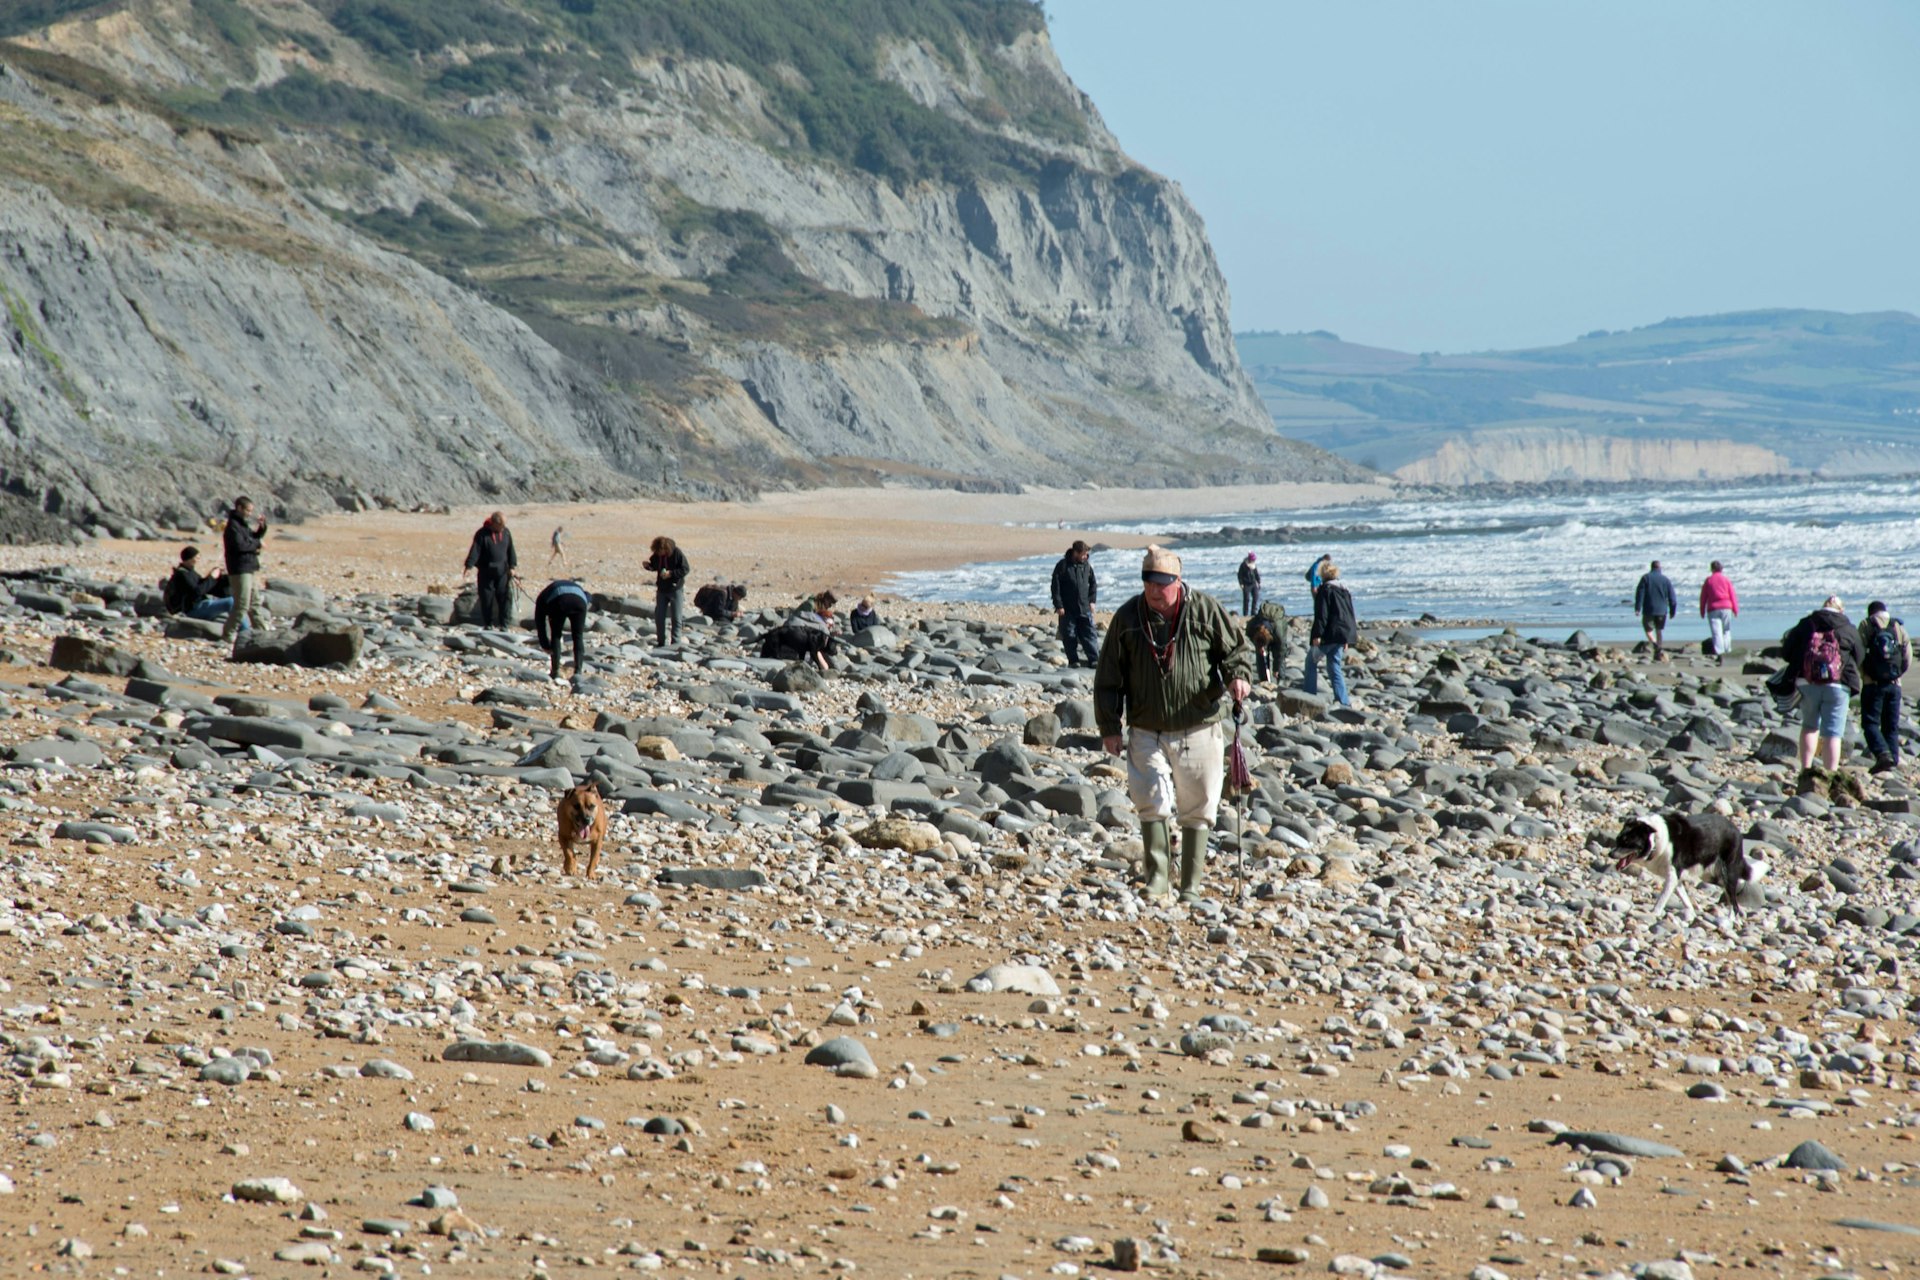 Fossil hunters at the world famous Jurassic coast between Charmouth and Golden Cap, Dorset.